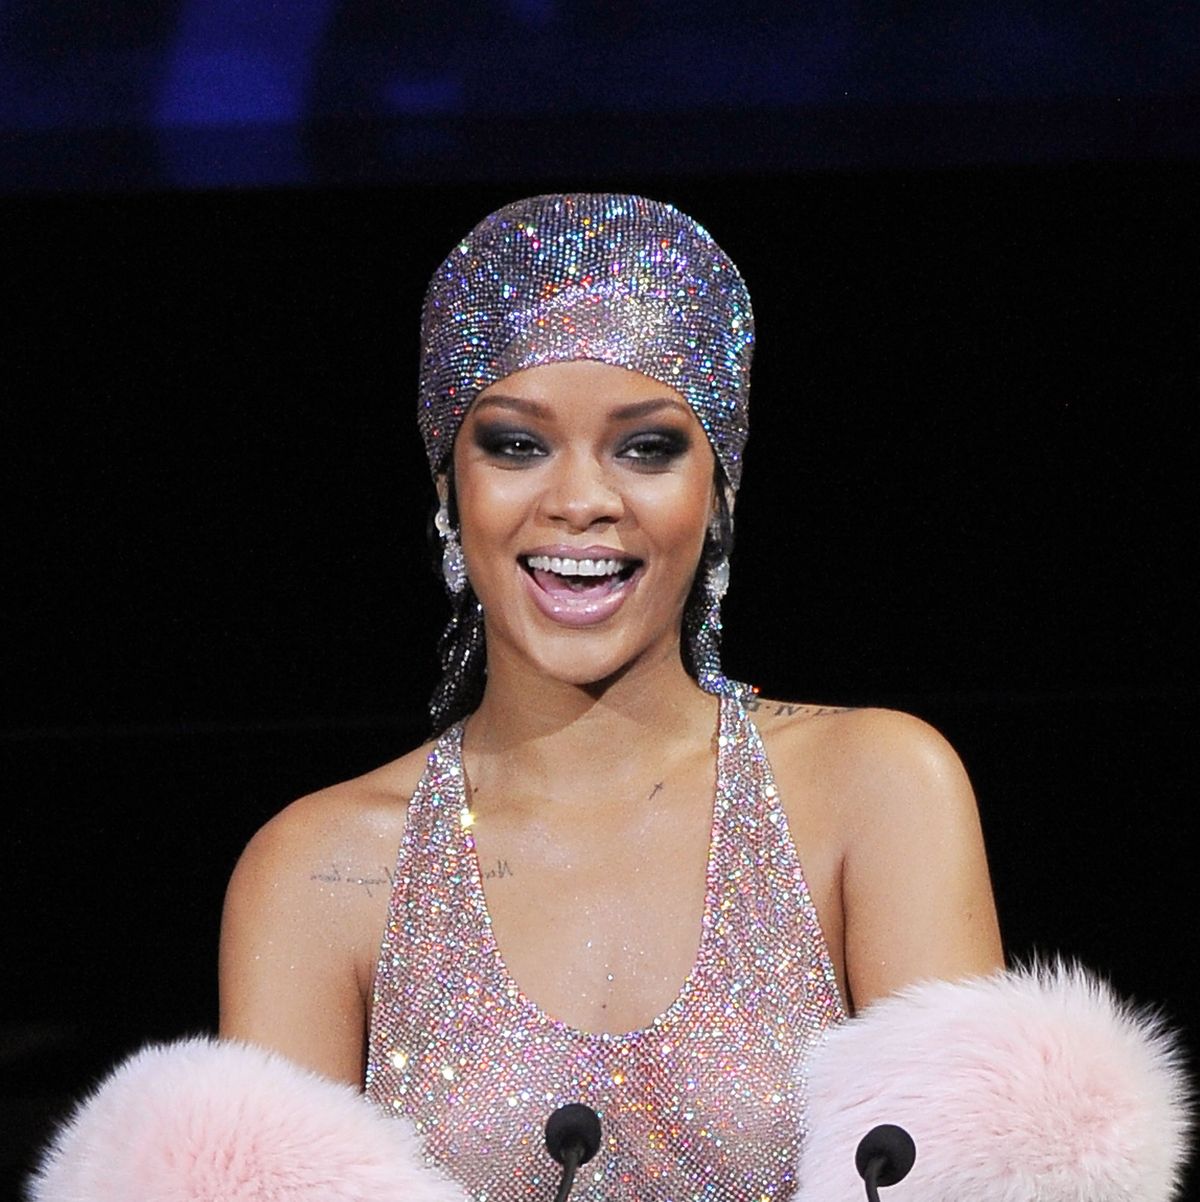 Rihanna Wears Lace Catsuit and Diamonds While Self-Isolating